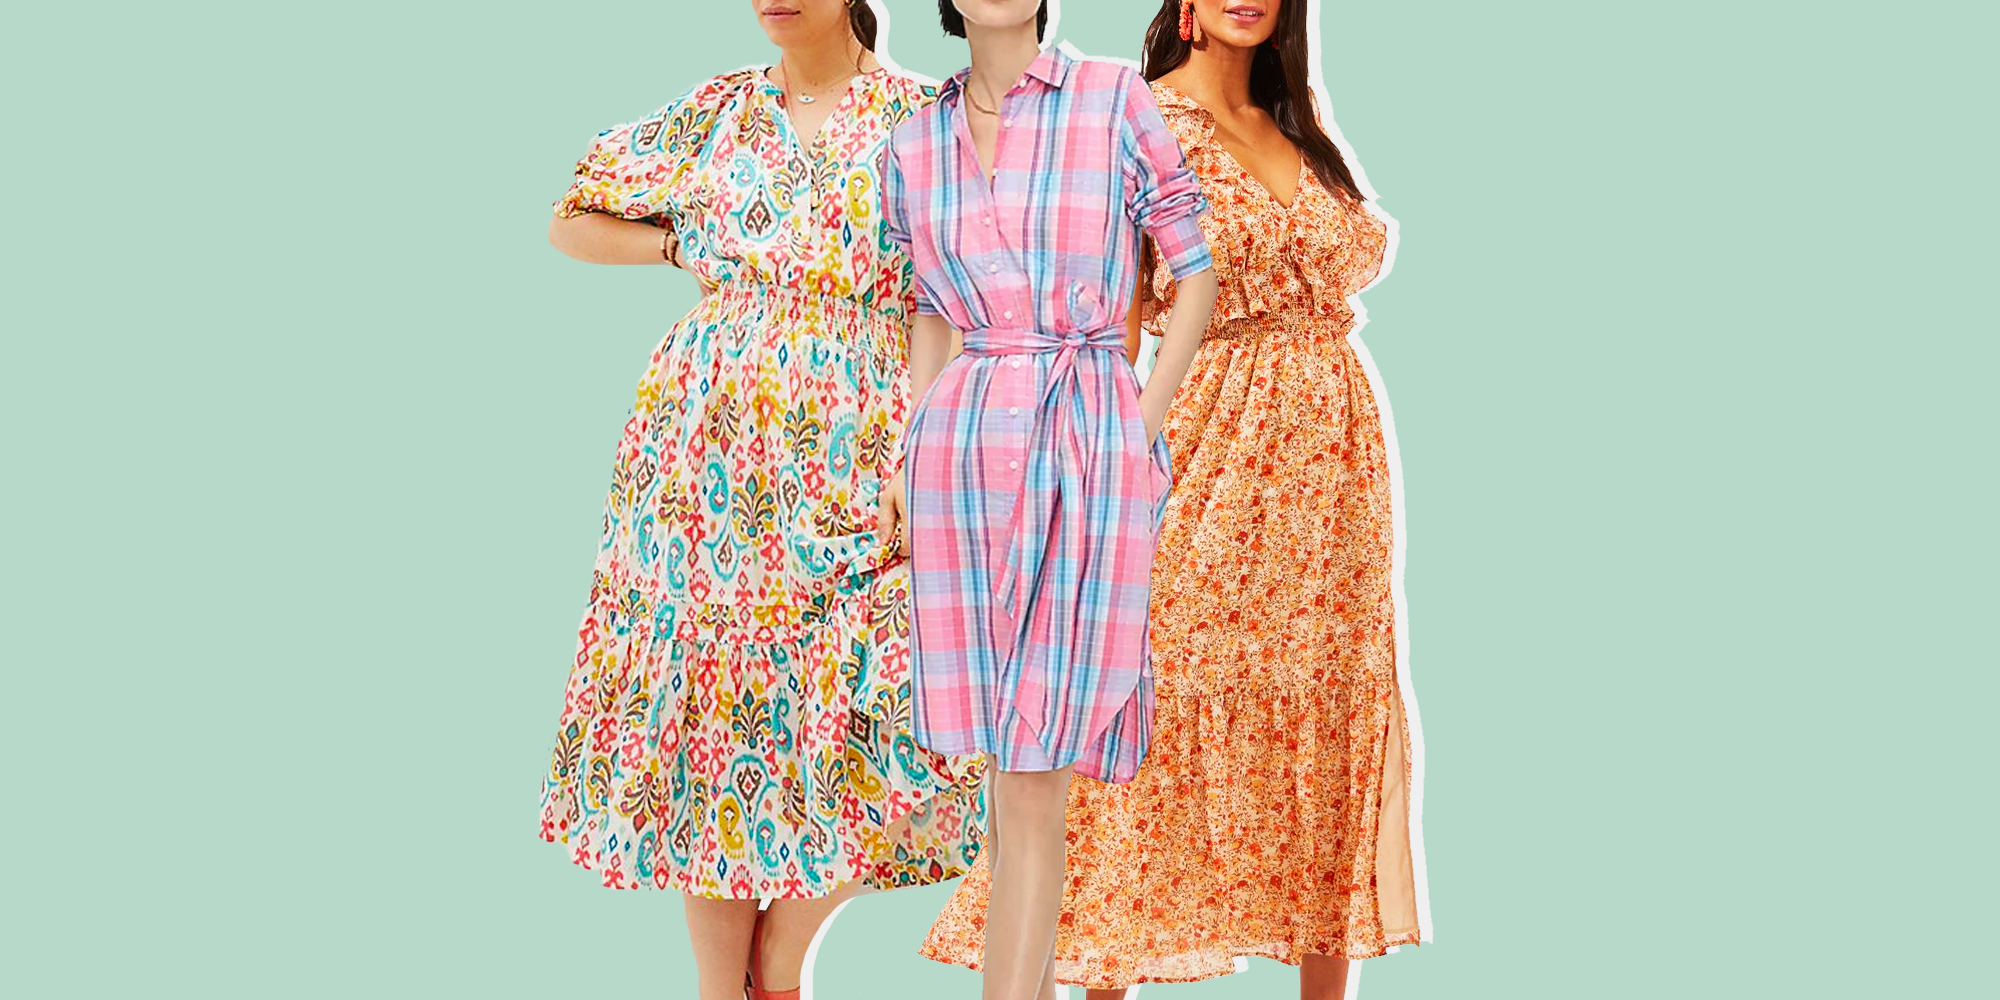 Lightweight summer dresses with sleeves